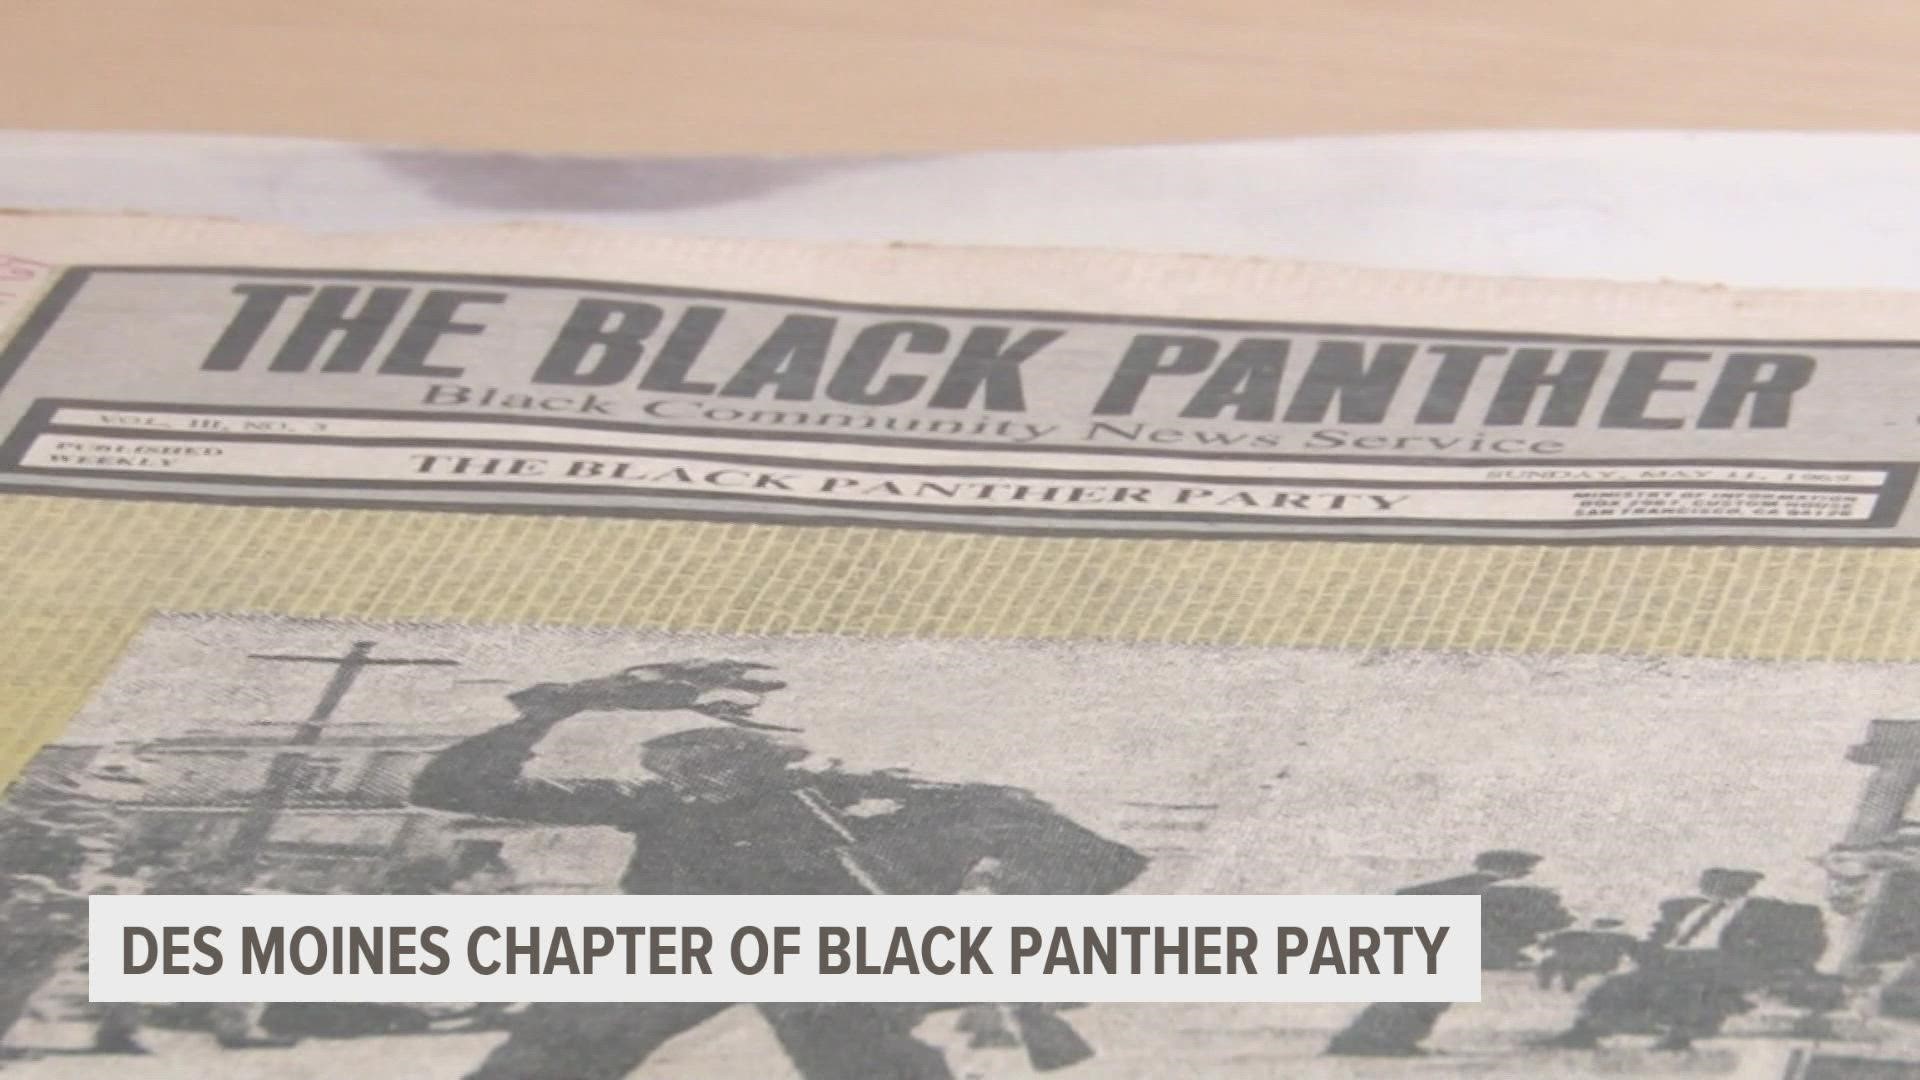 A Lieutenant in the Des Moines Black Panther Party details what it was like being a part of the organization.